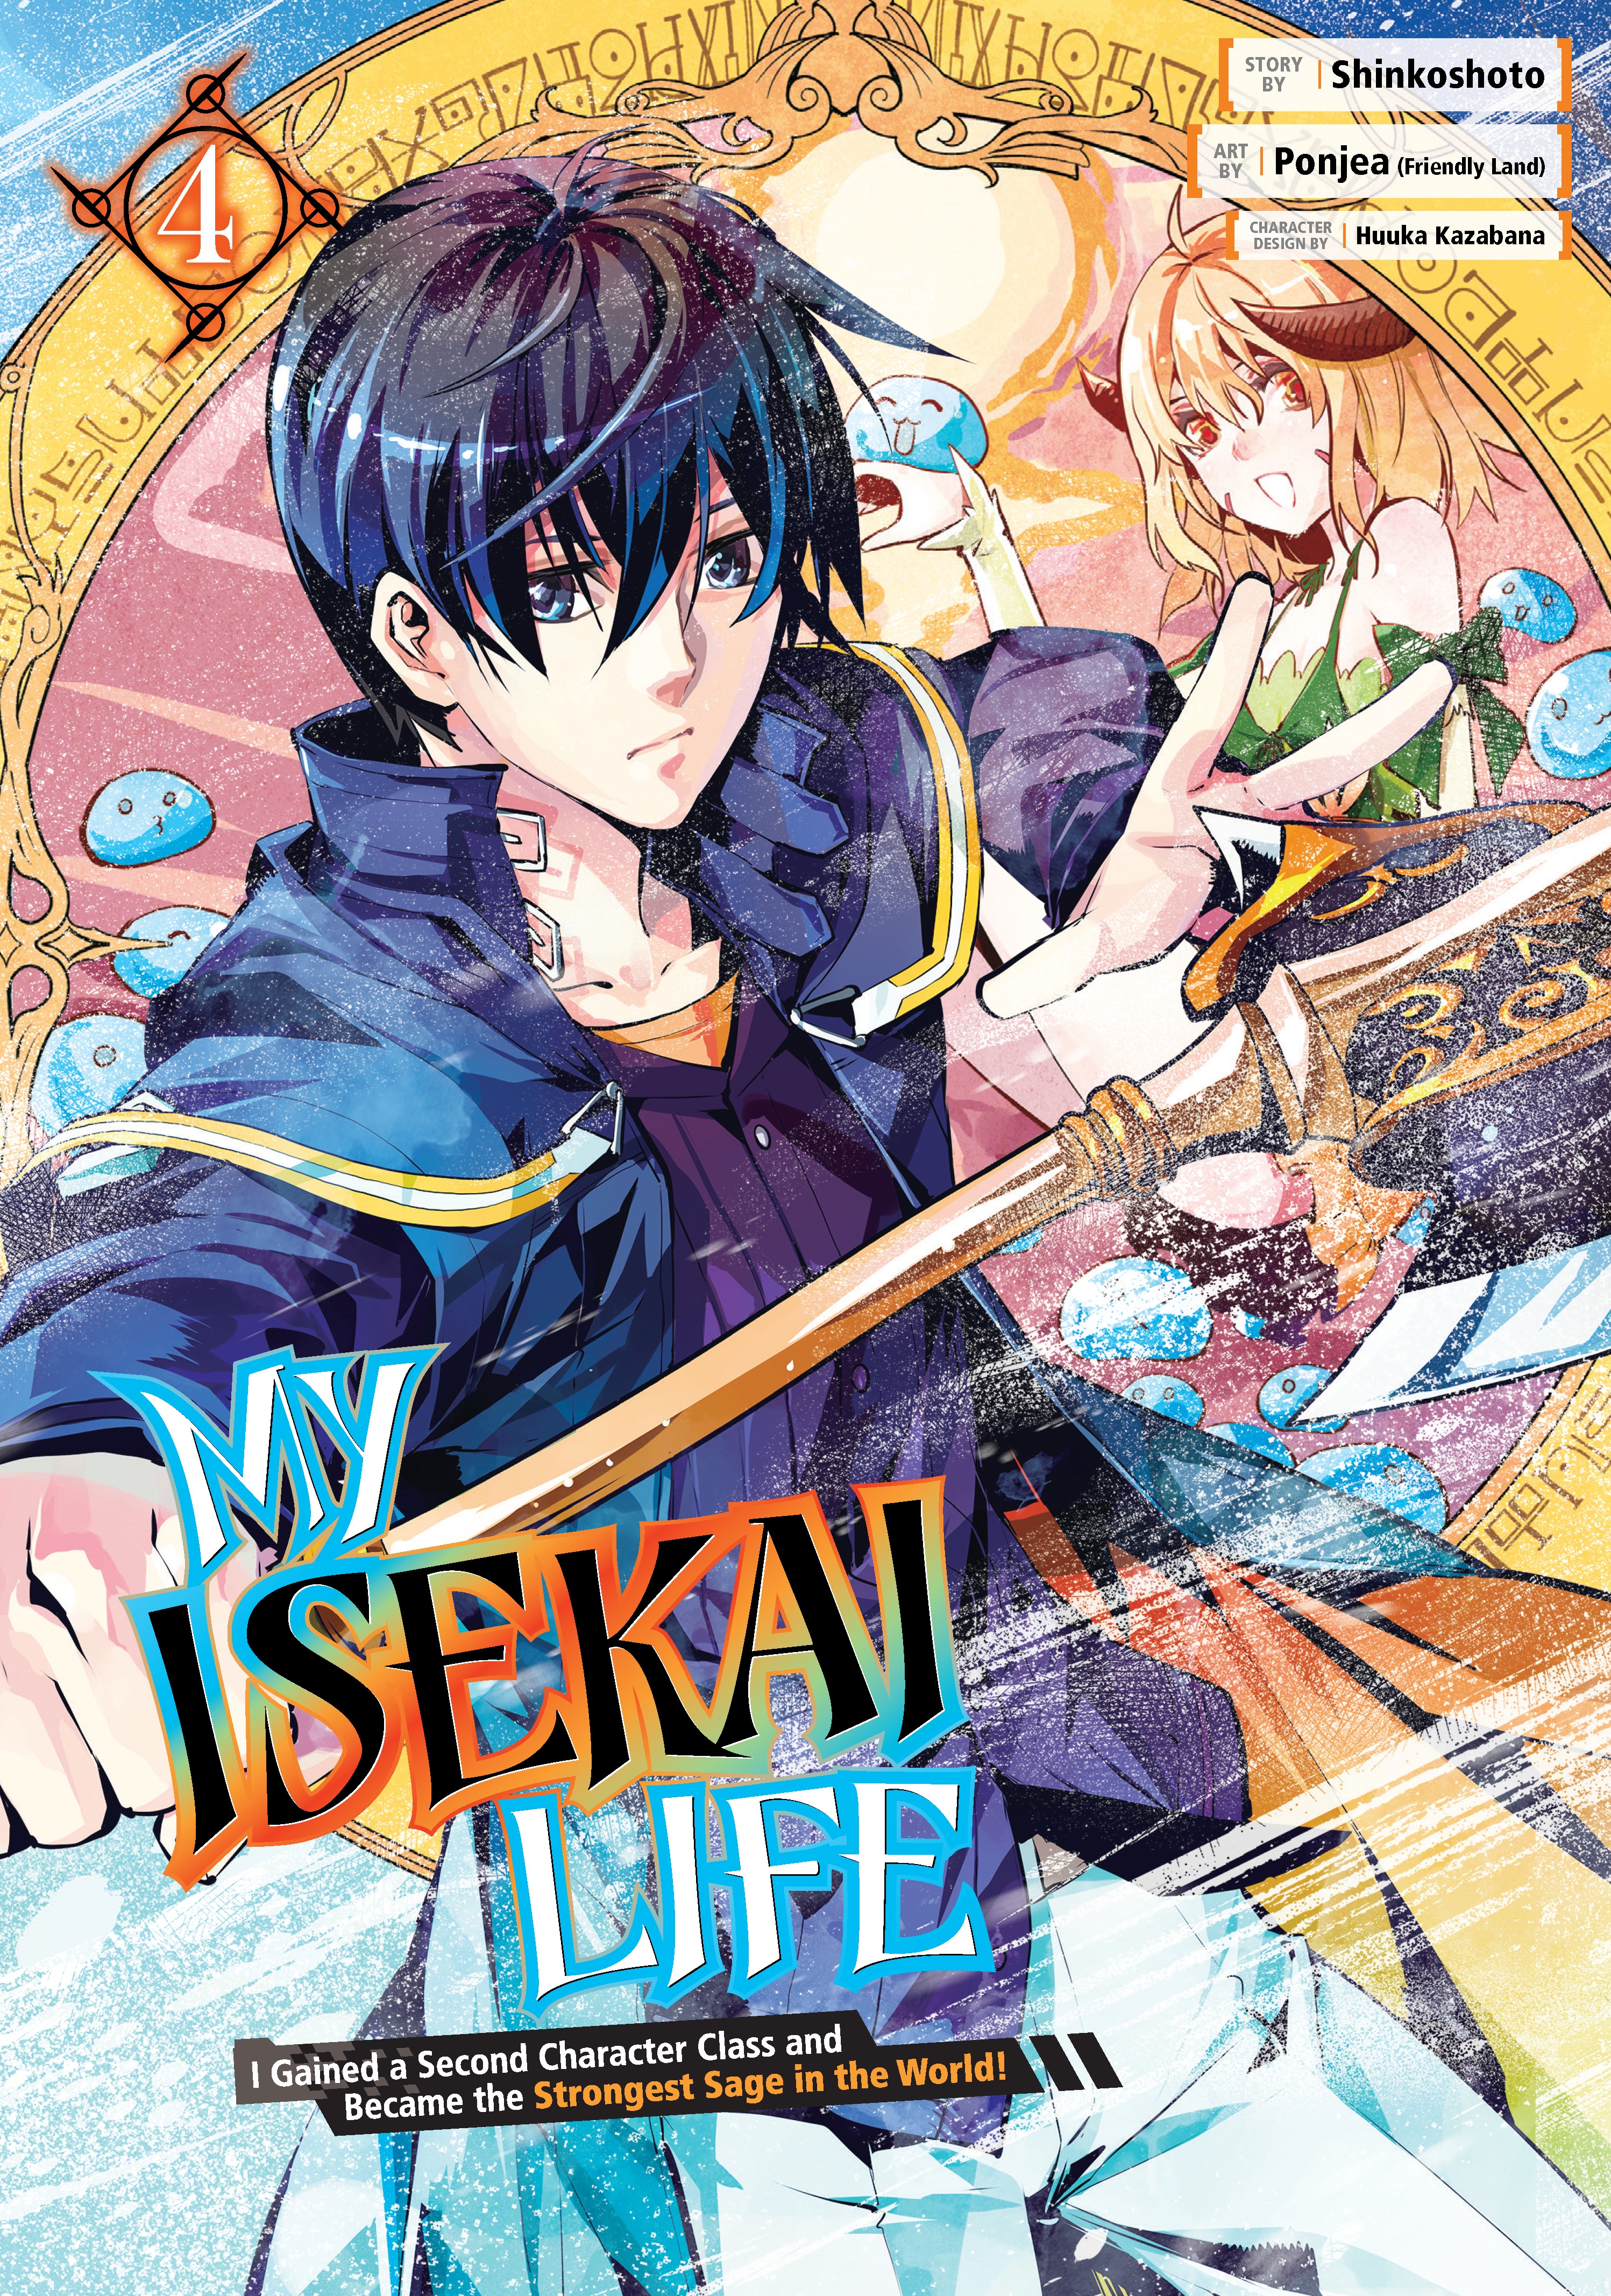 My Isekai Life: I Gained a Second Character Class and Became the Strongest  Sage in the World! Teaser Visual : r/anime